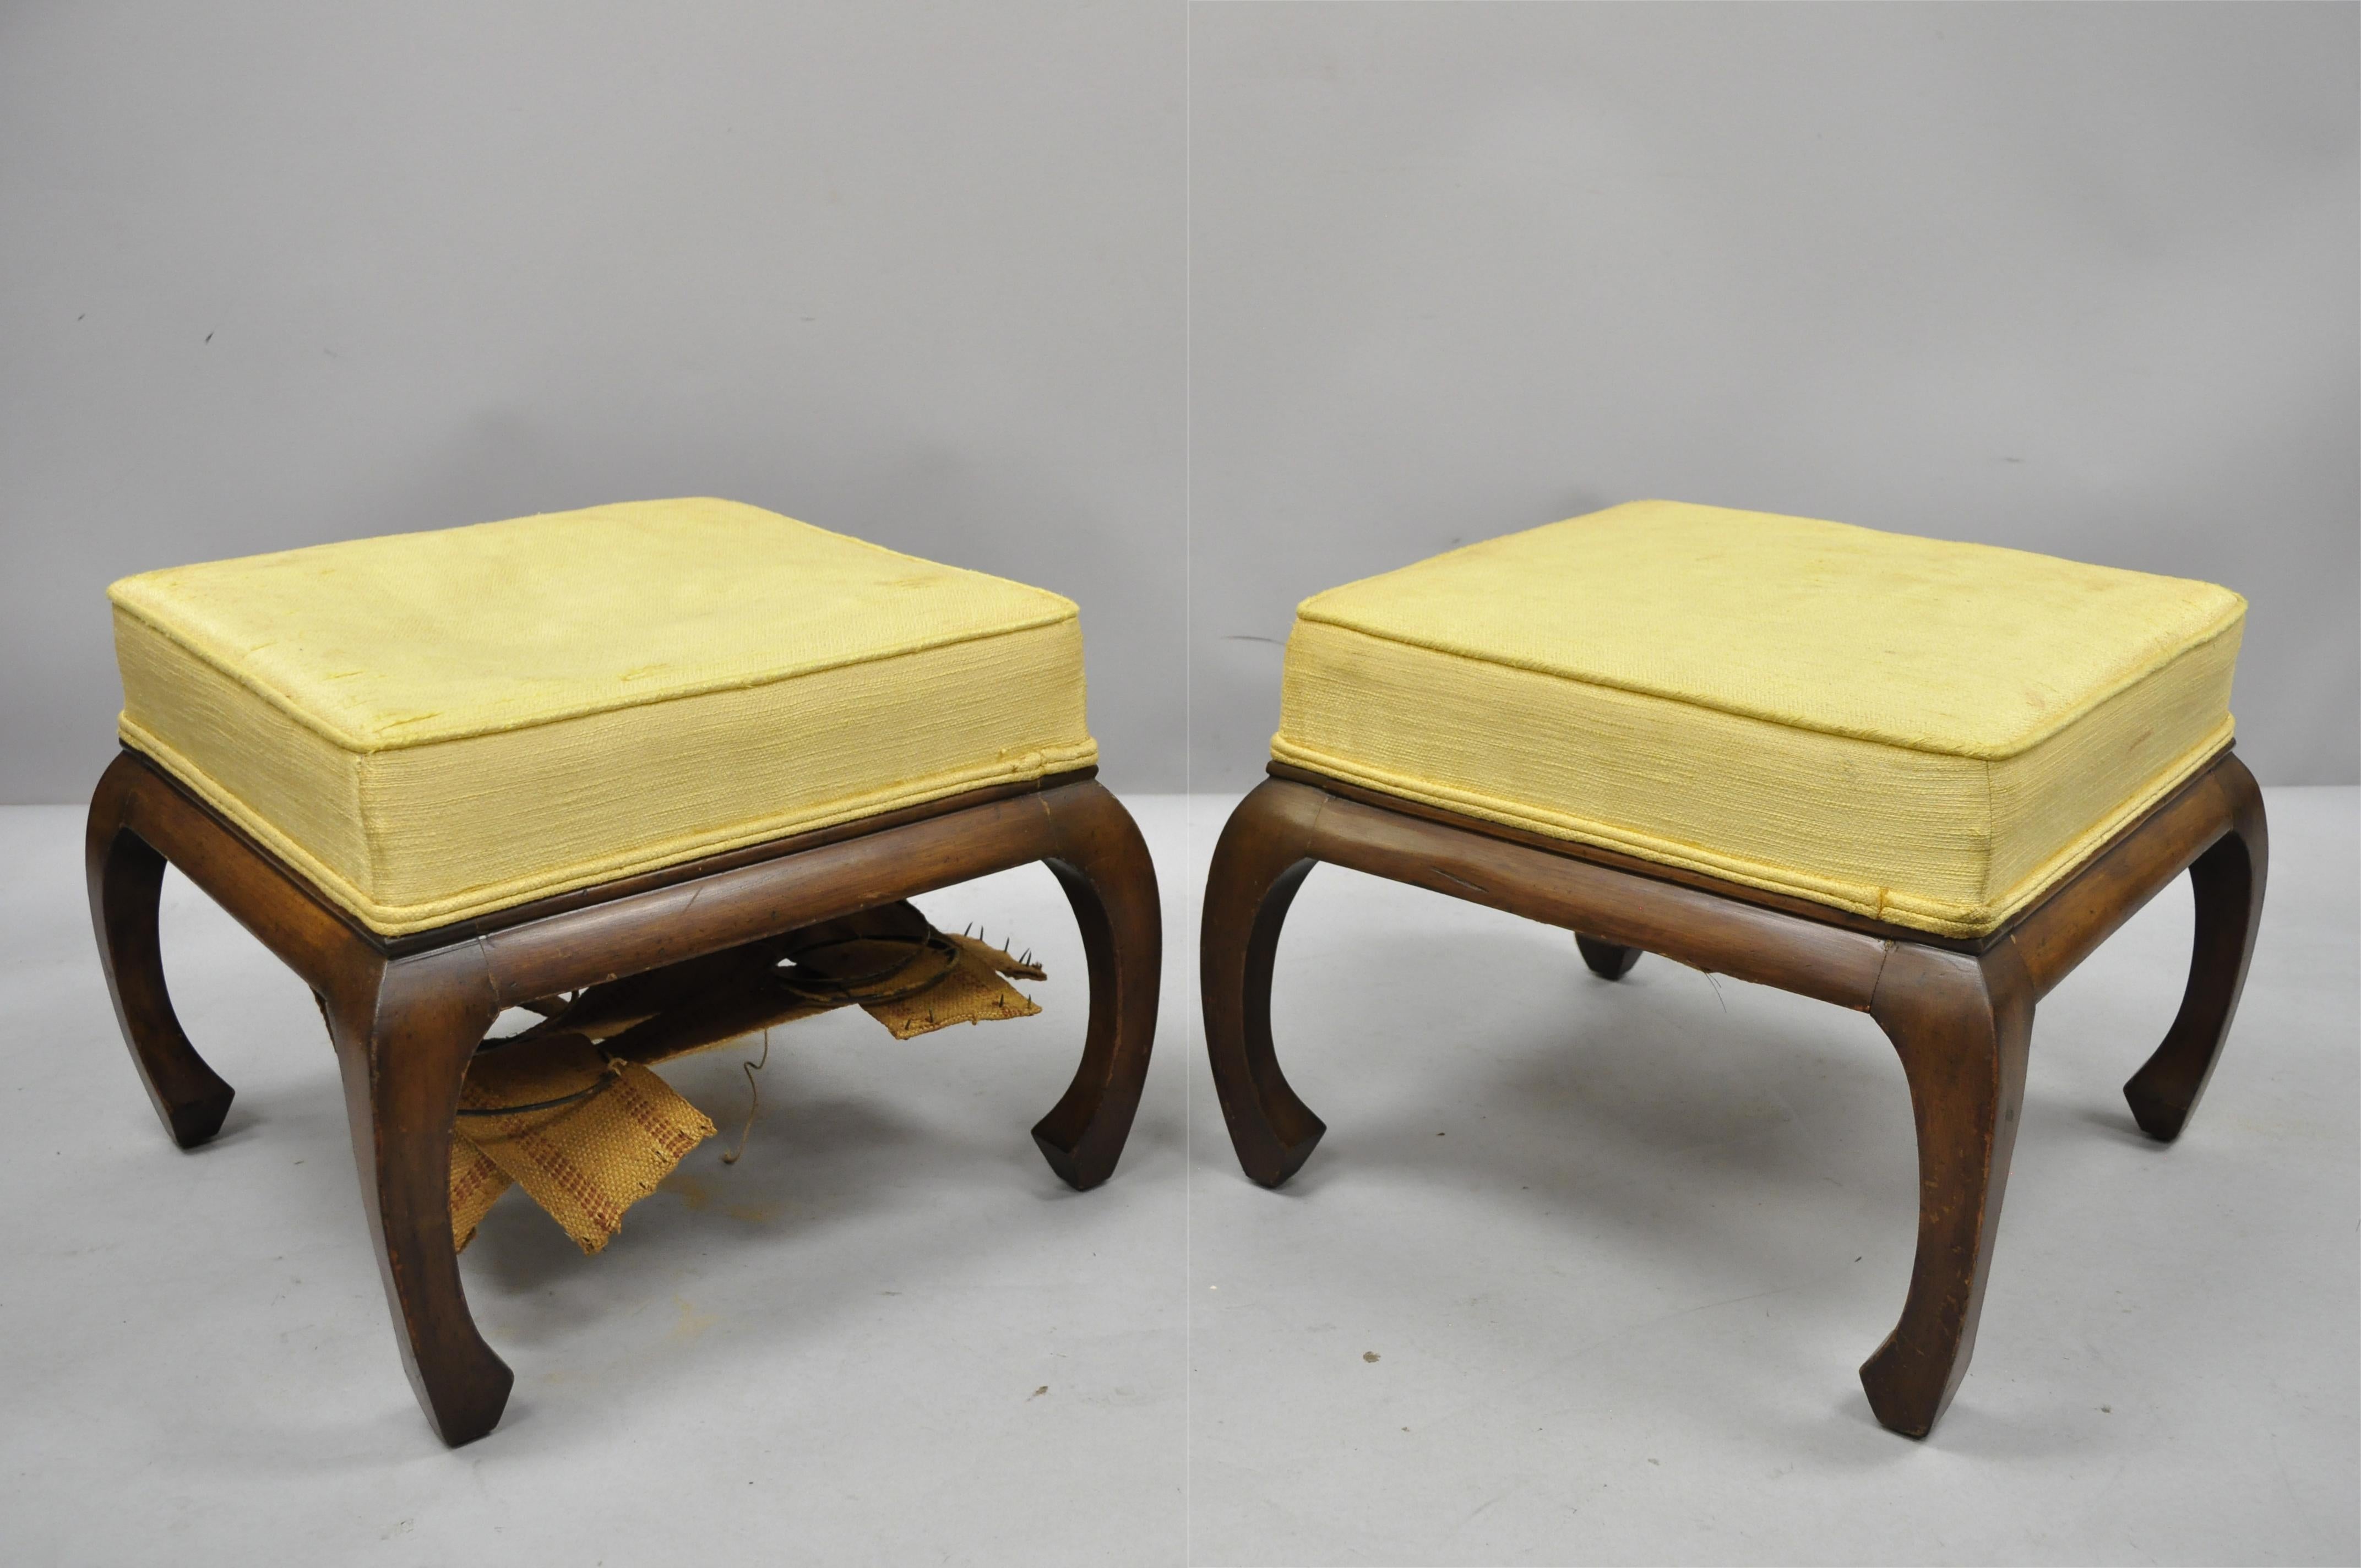 Pair of vintage chinoiserie Ming style box seat upholstered ottoman stools. Item features square box seats, shapely 